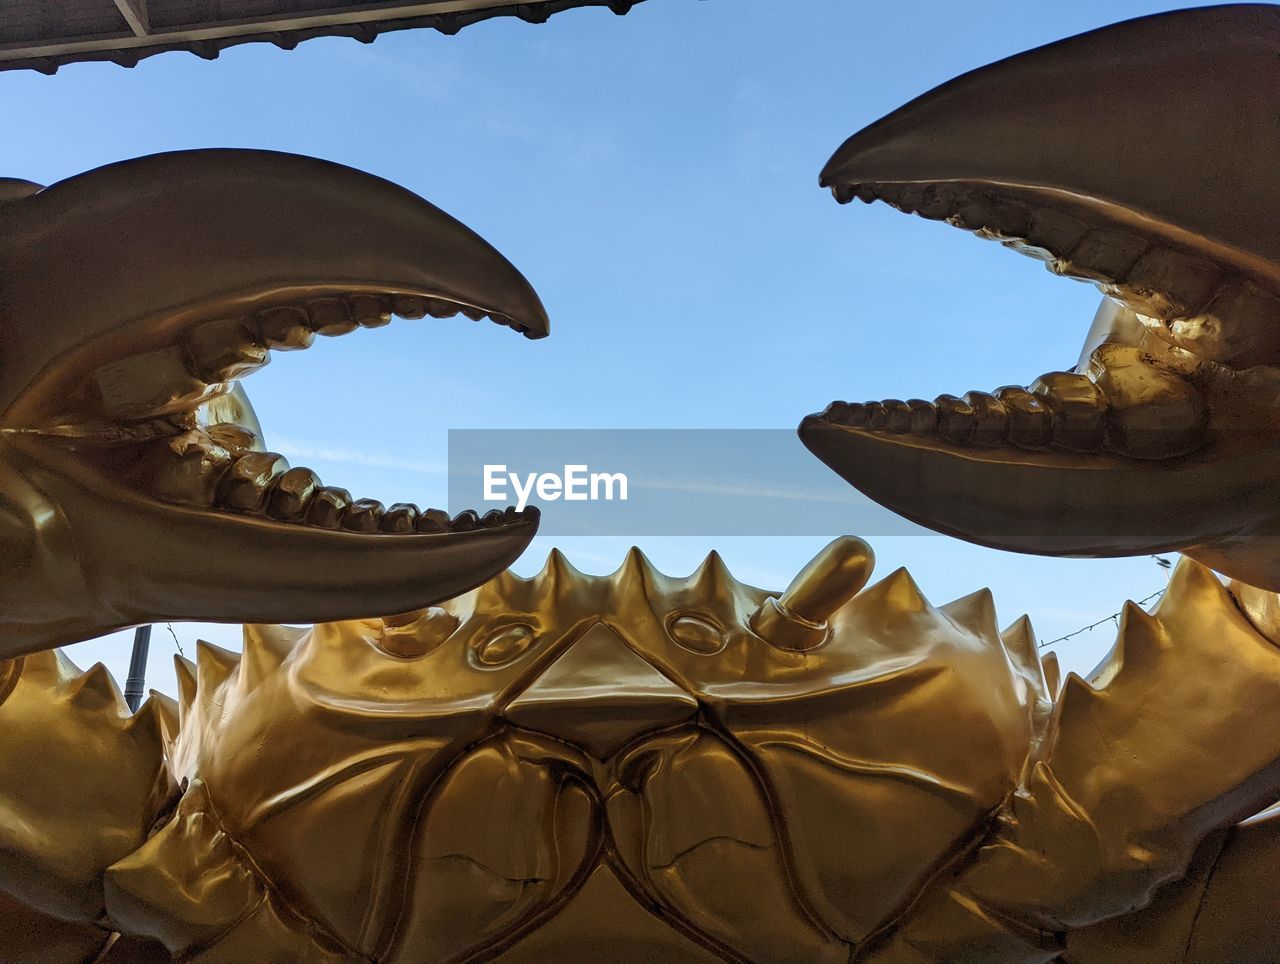 dragon, architecture, travel destinations, history, sculpture, no people, the past, art, religion, sky, travel, belief, statue, nature, animal, gold, temple - building, representation, screenshot, craft, animal representation, ancient, animal themes, outdoors